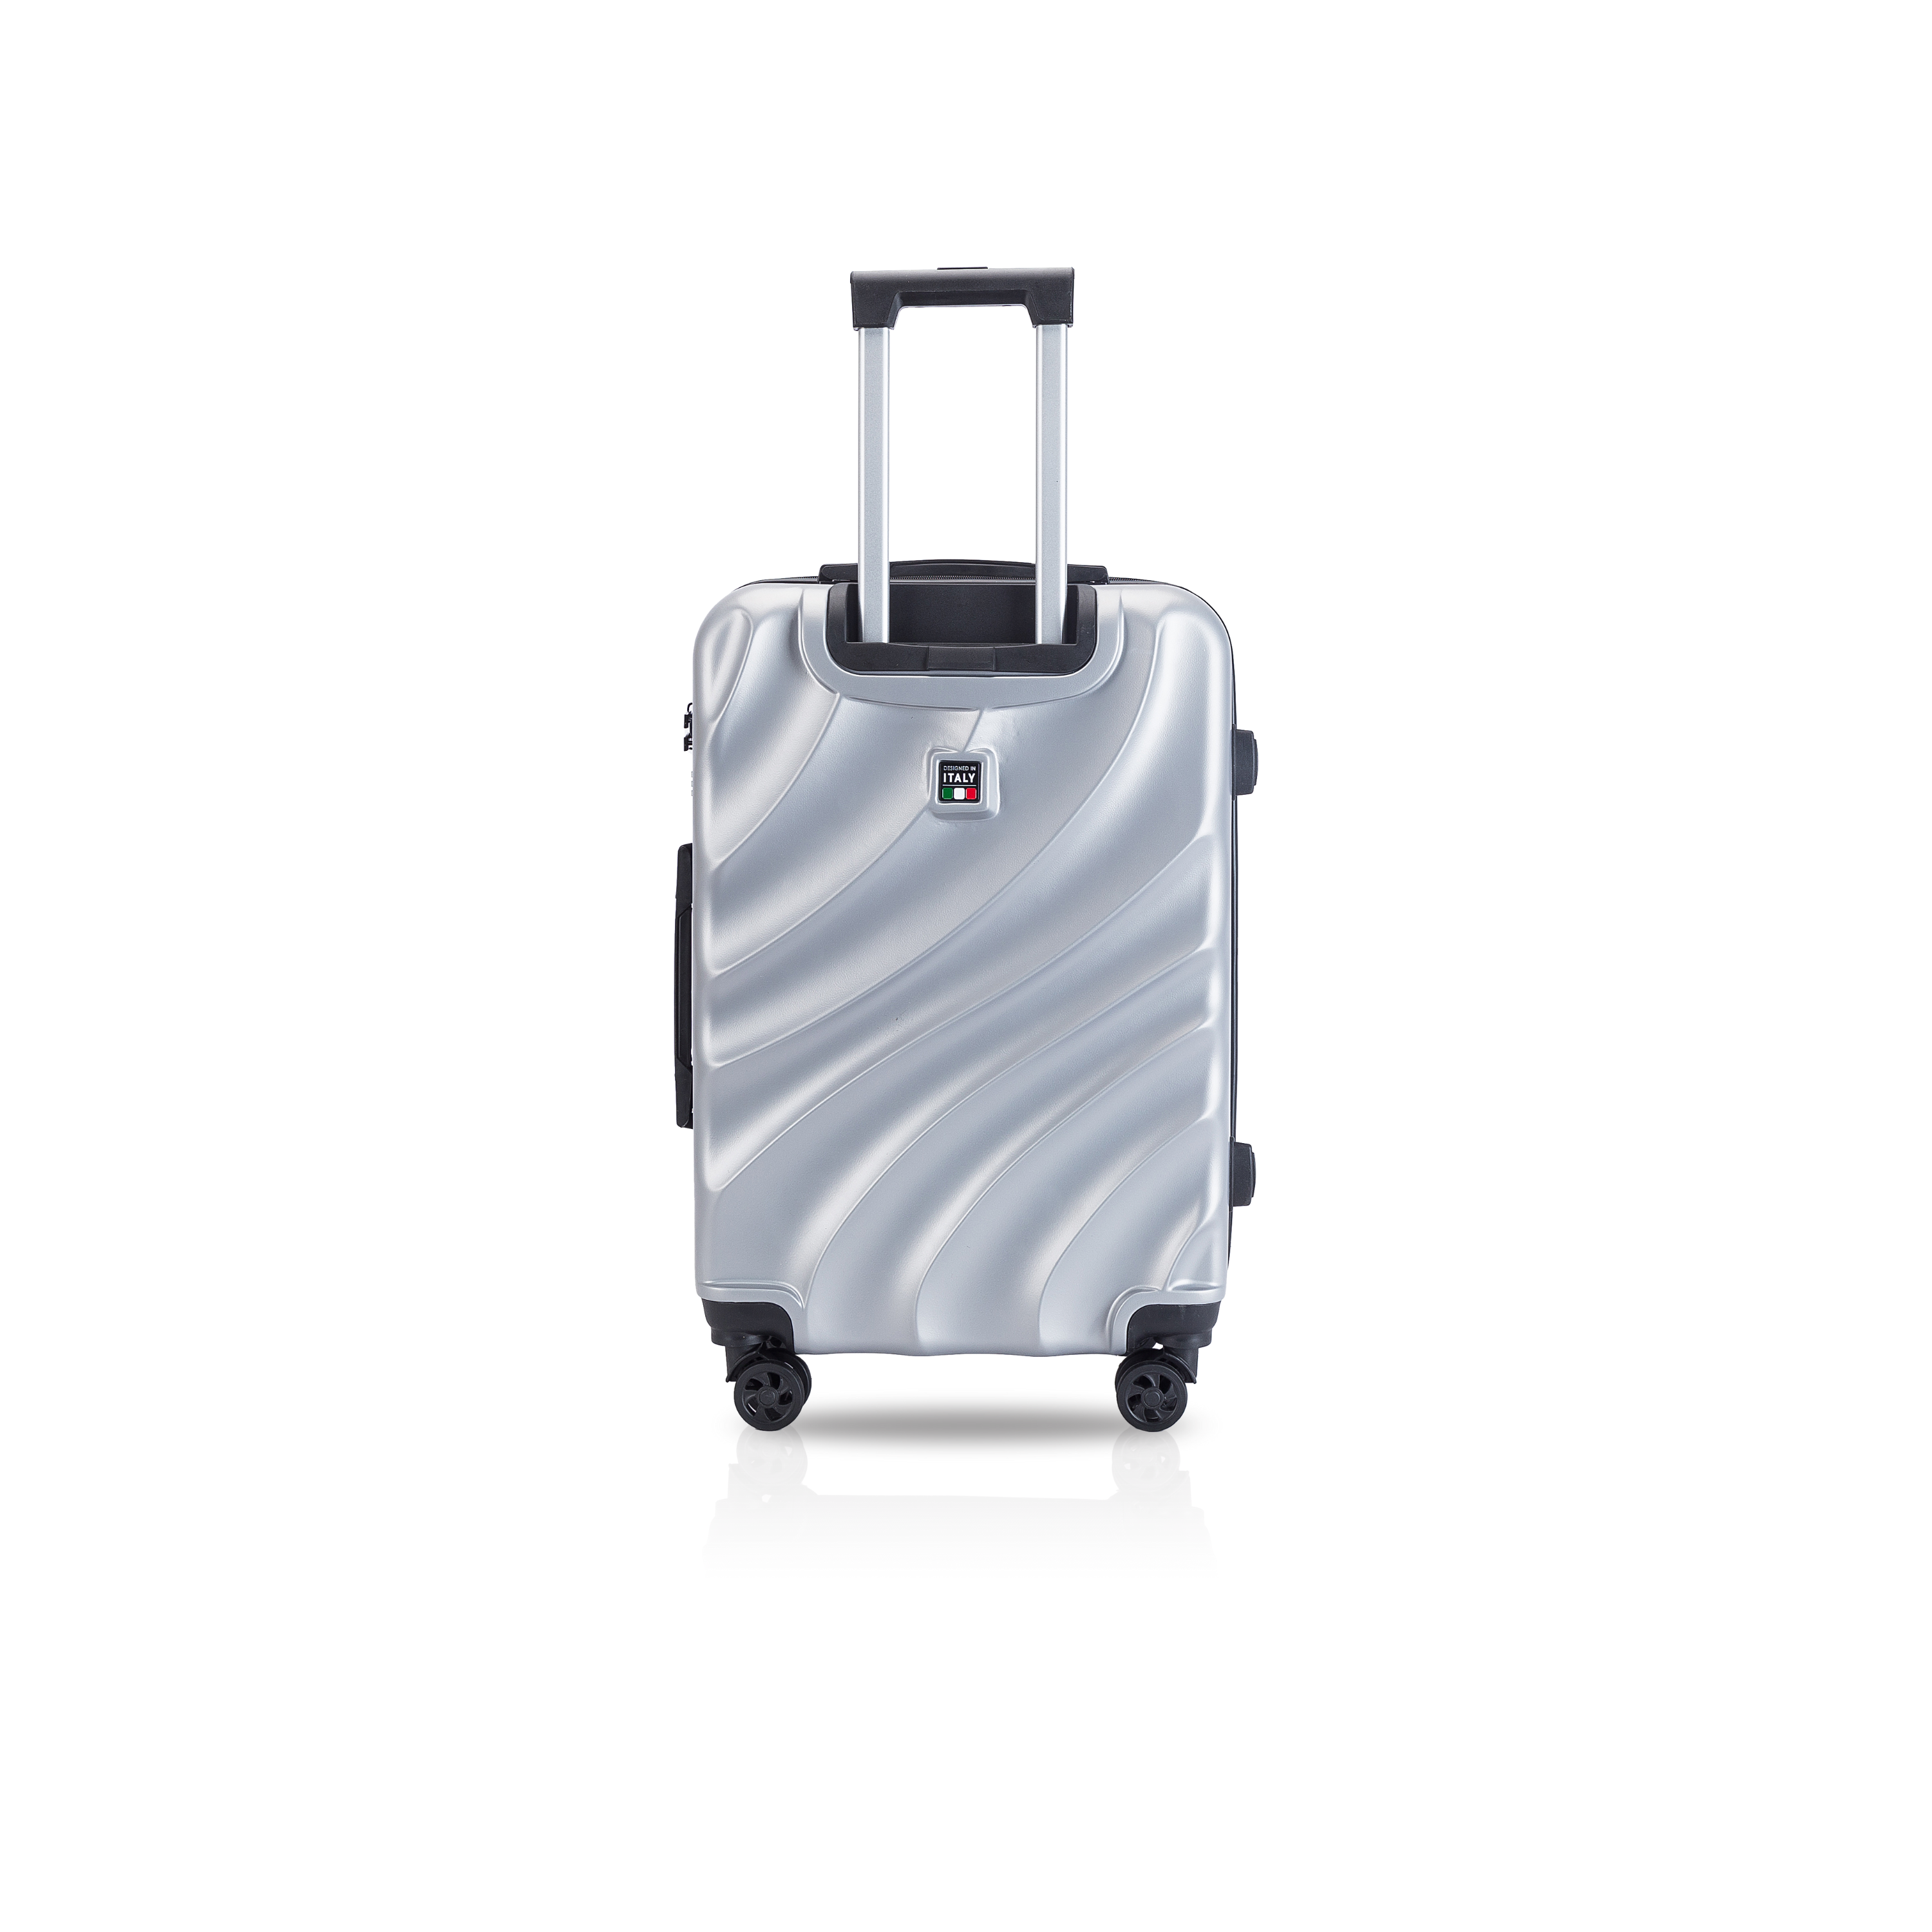 TUCCI CREMOSA ABS 28" Travel Luggage